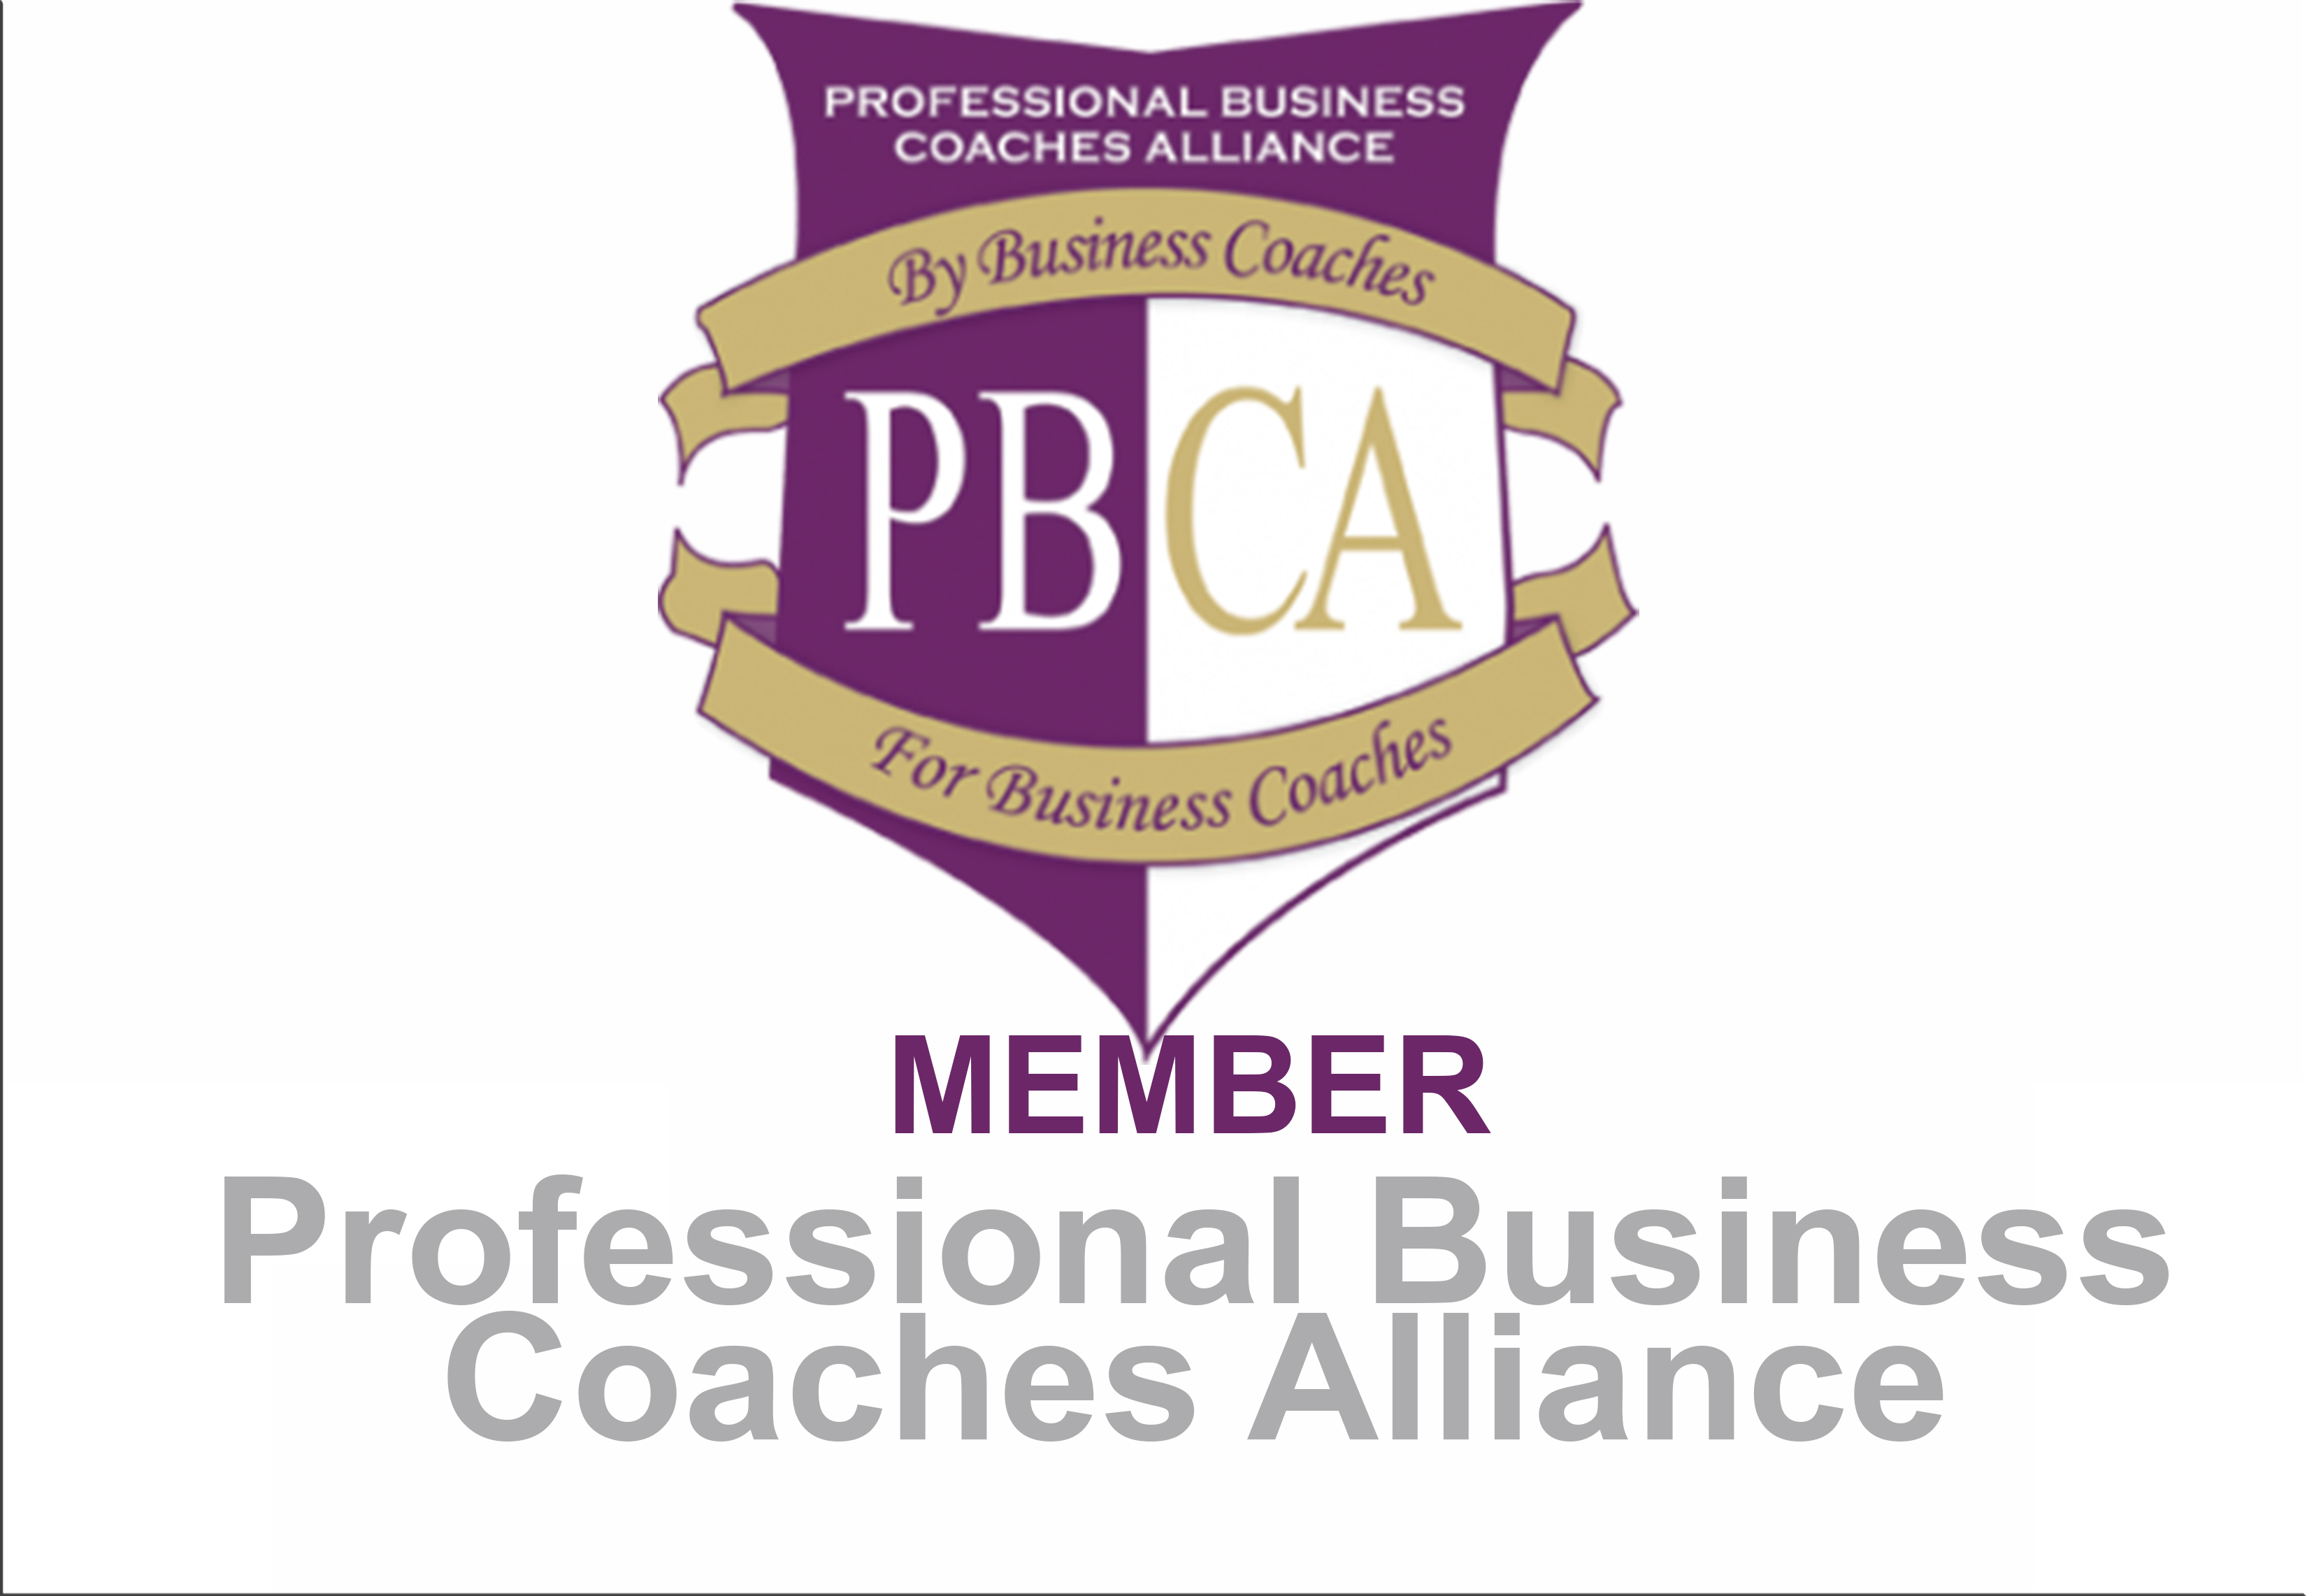 Member of Professional Business Coaches Alliance